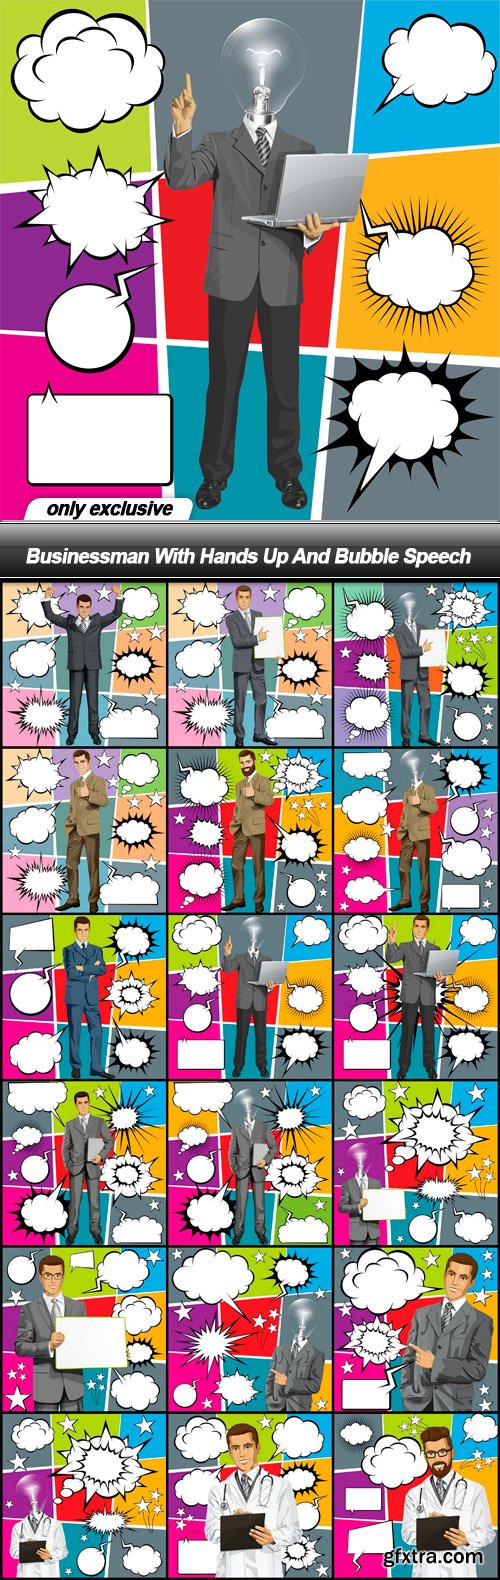 Businessman With Hands Up And Bubble Speech - 19 EPS